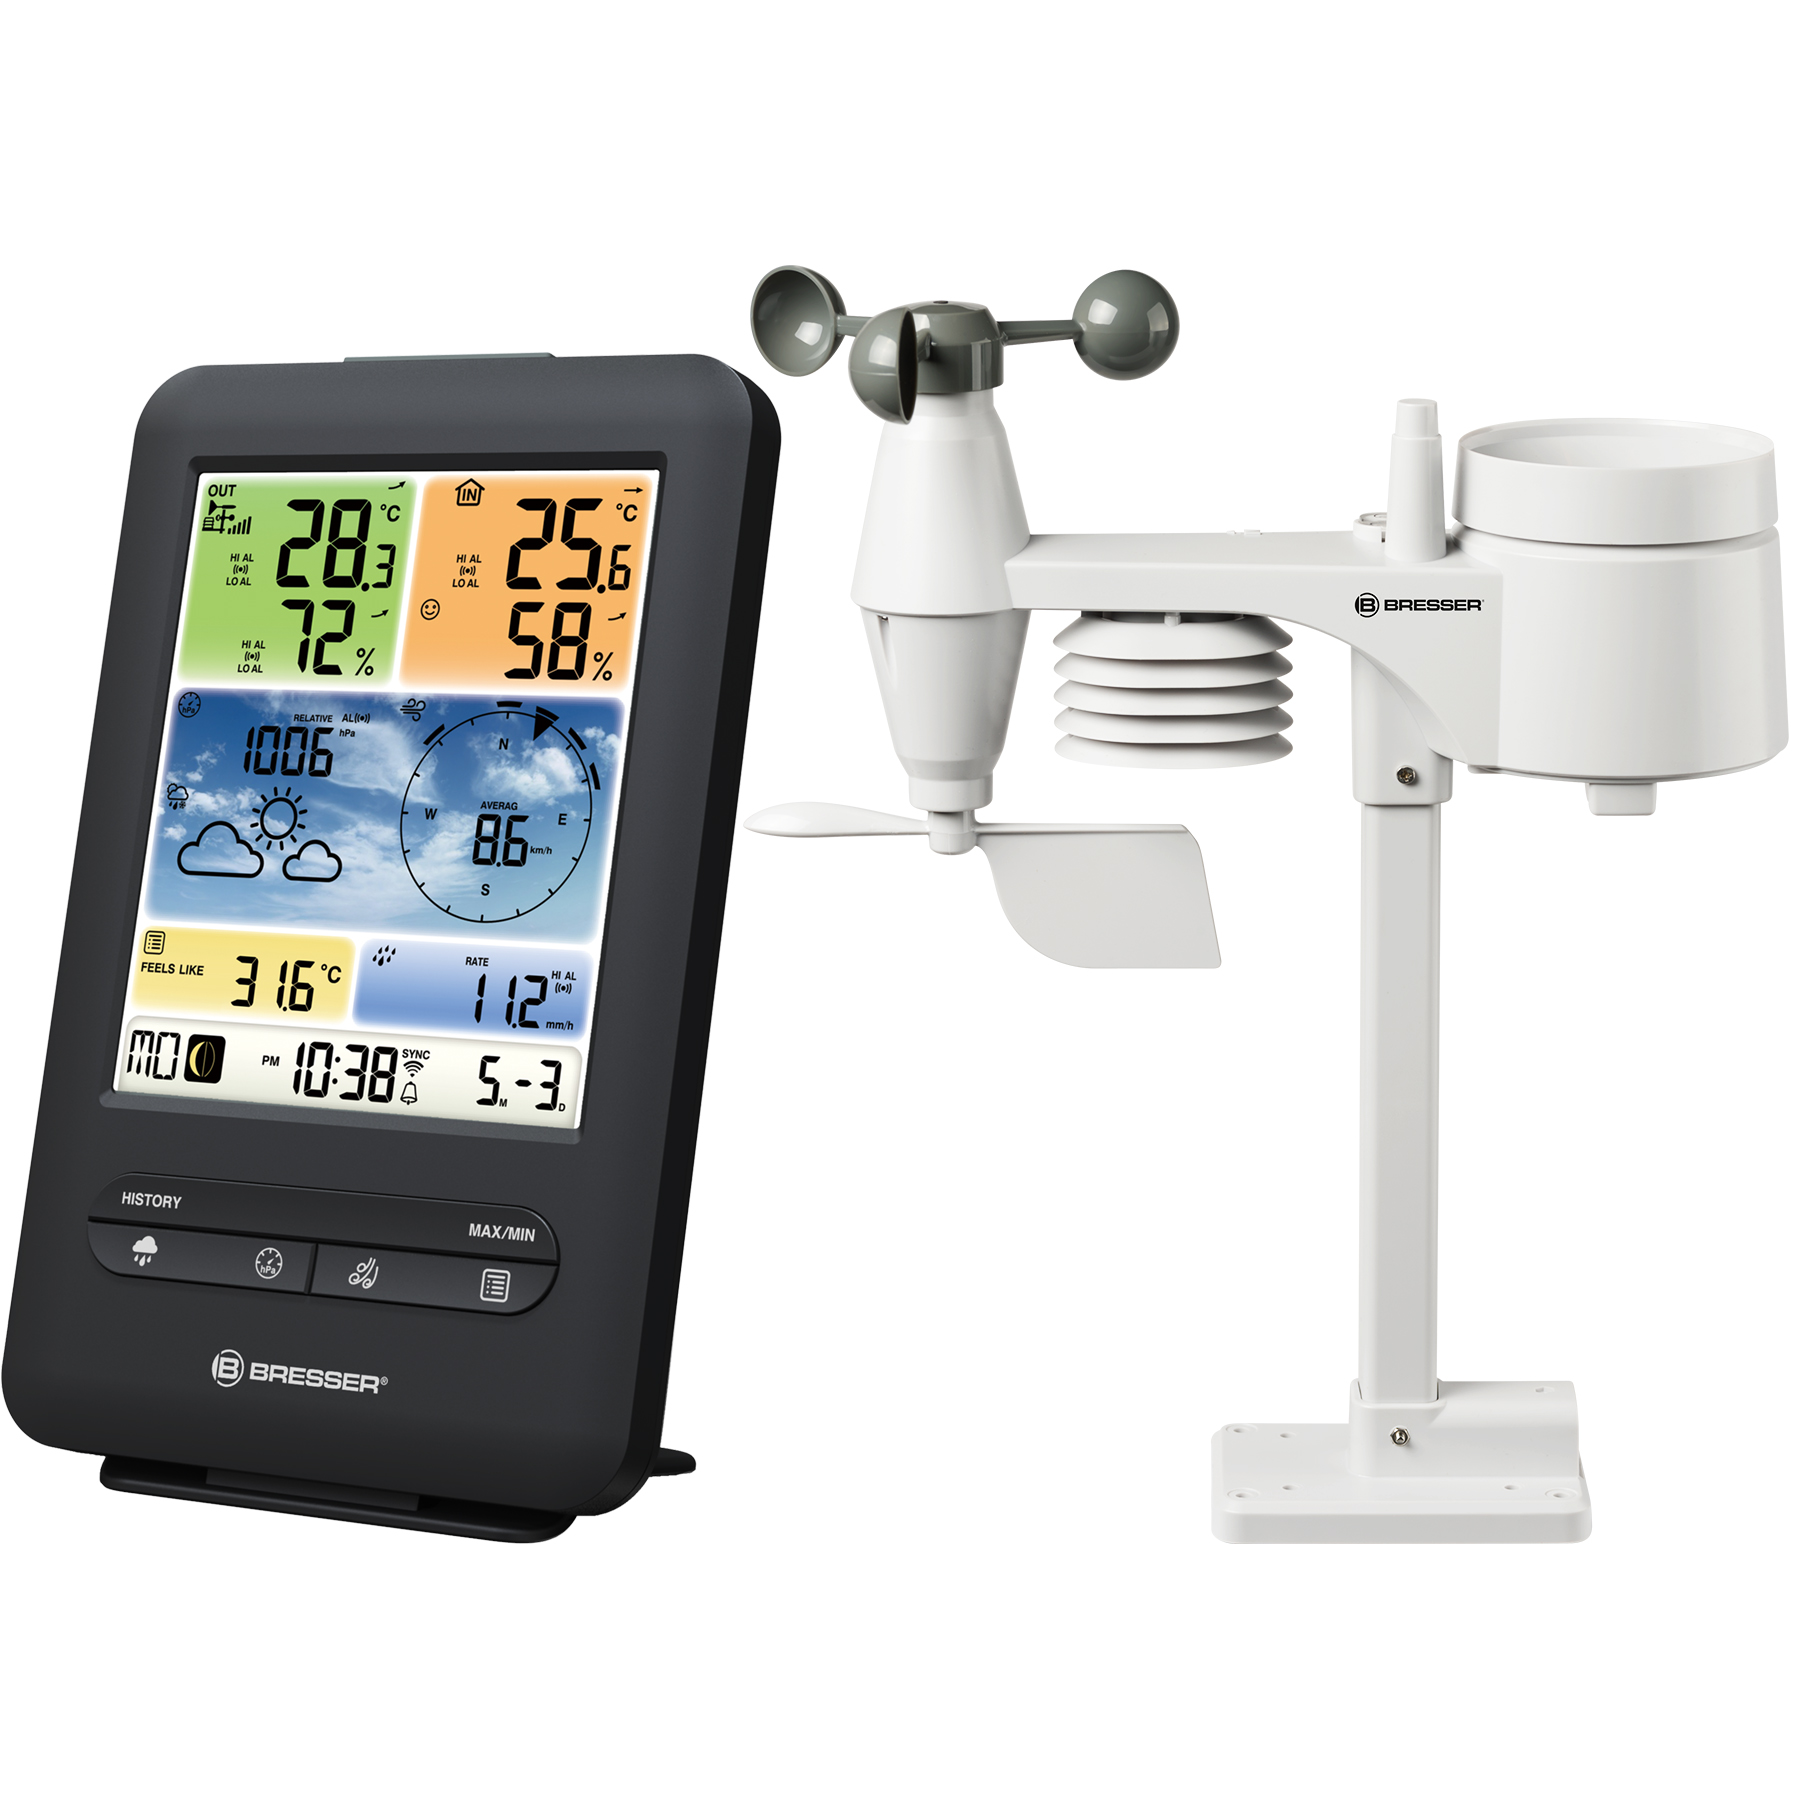 BRESSER Professional Wi-Fi Colour Weather Station 5-in-1 V